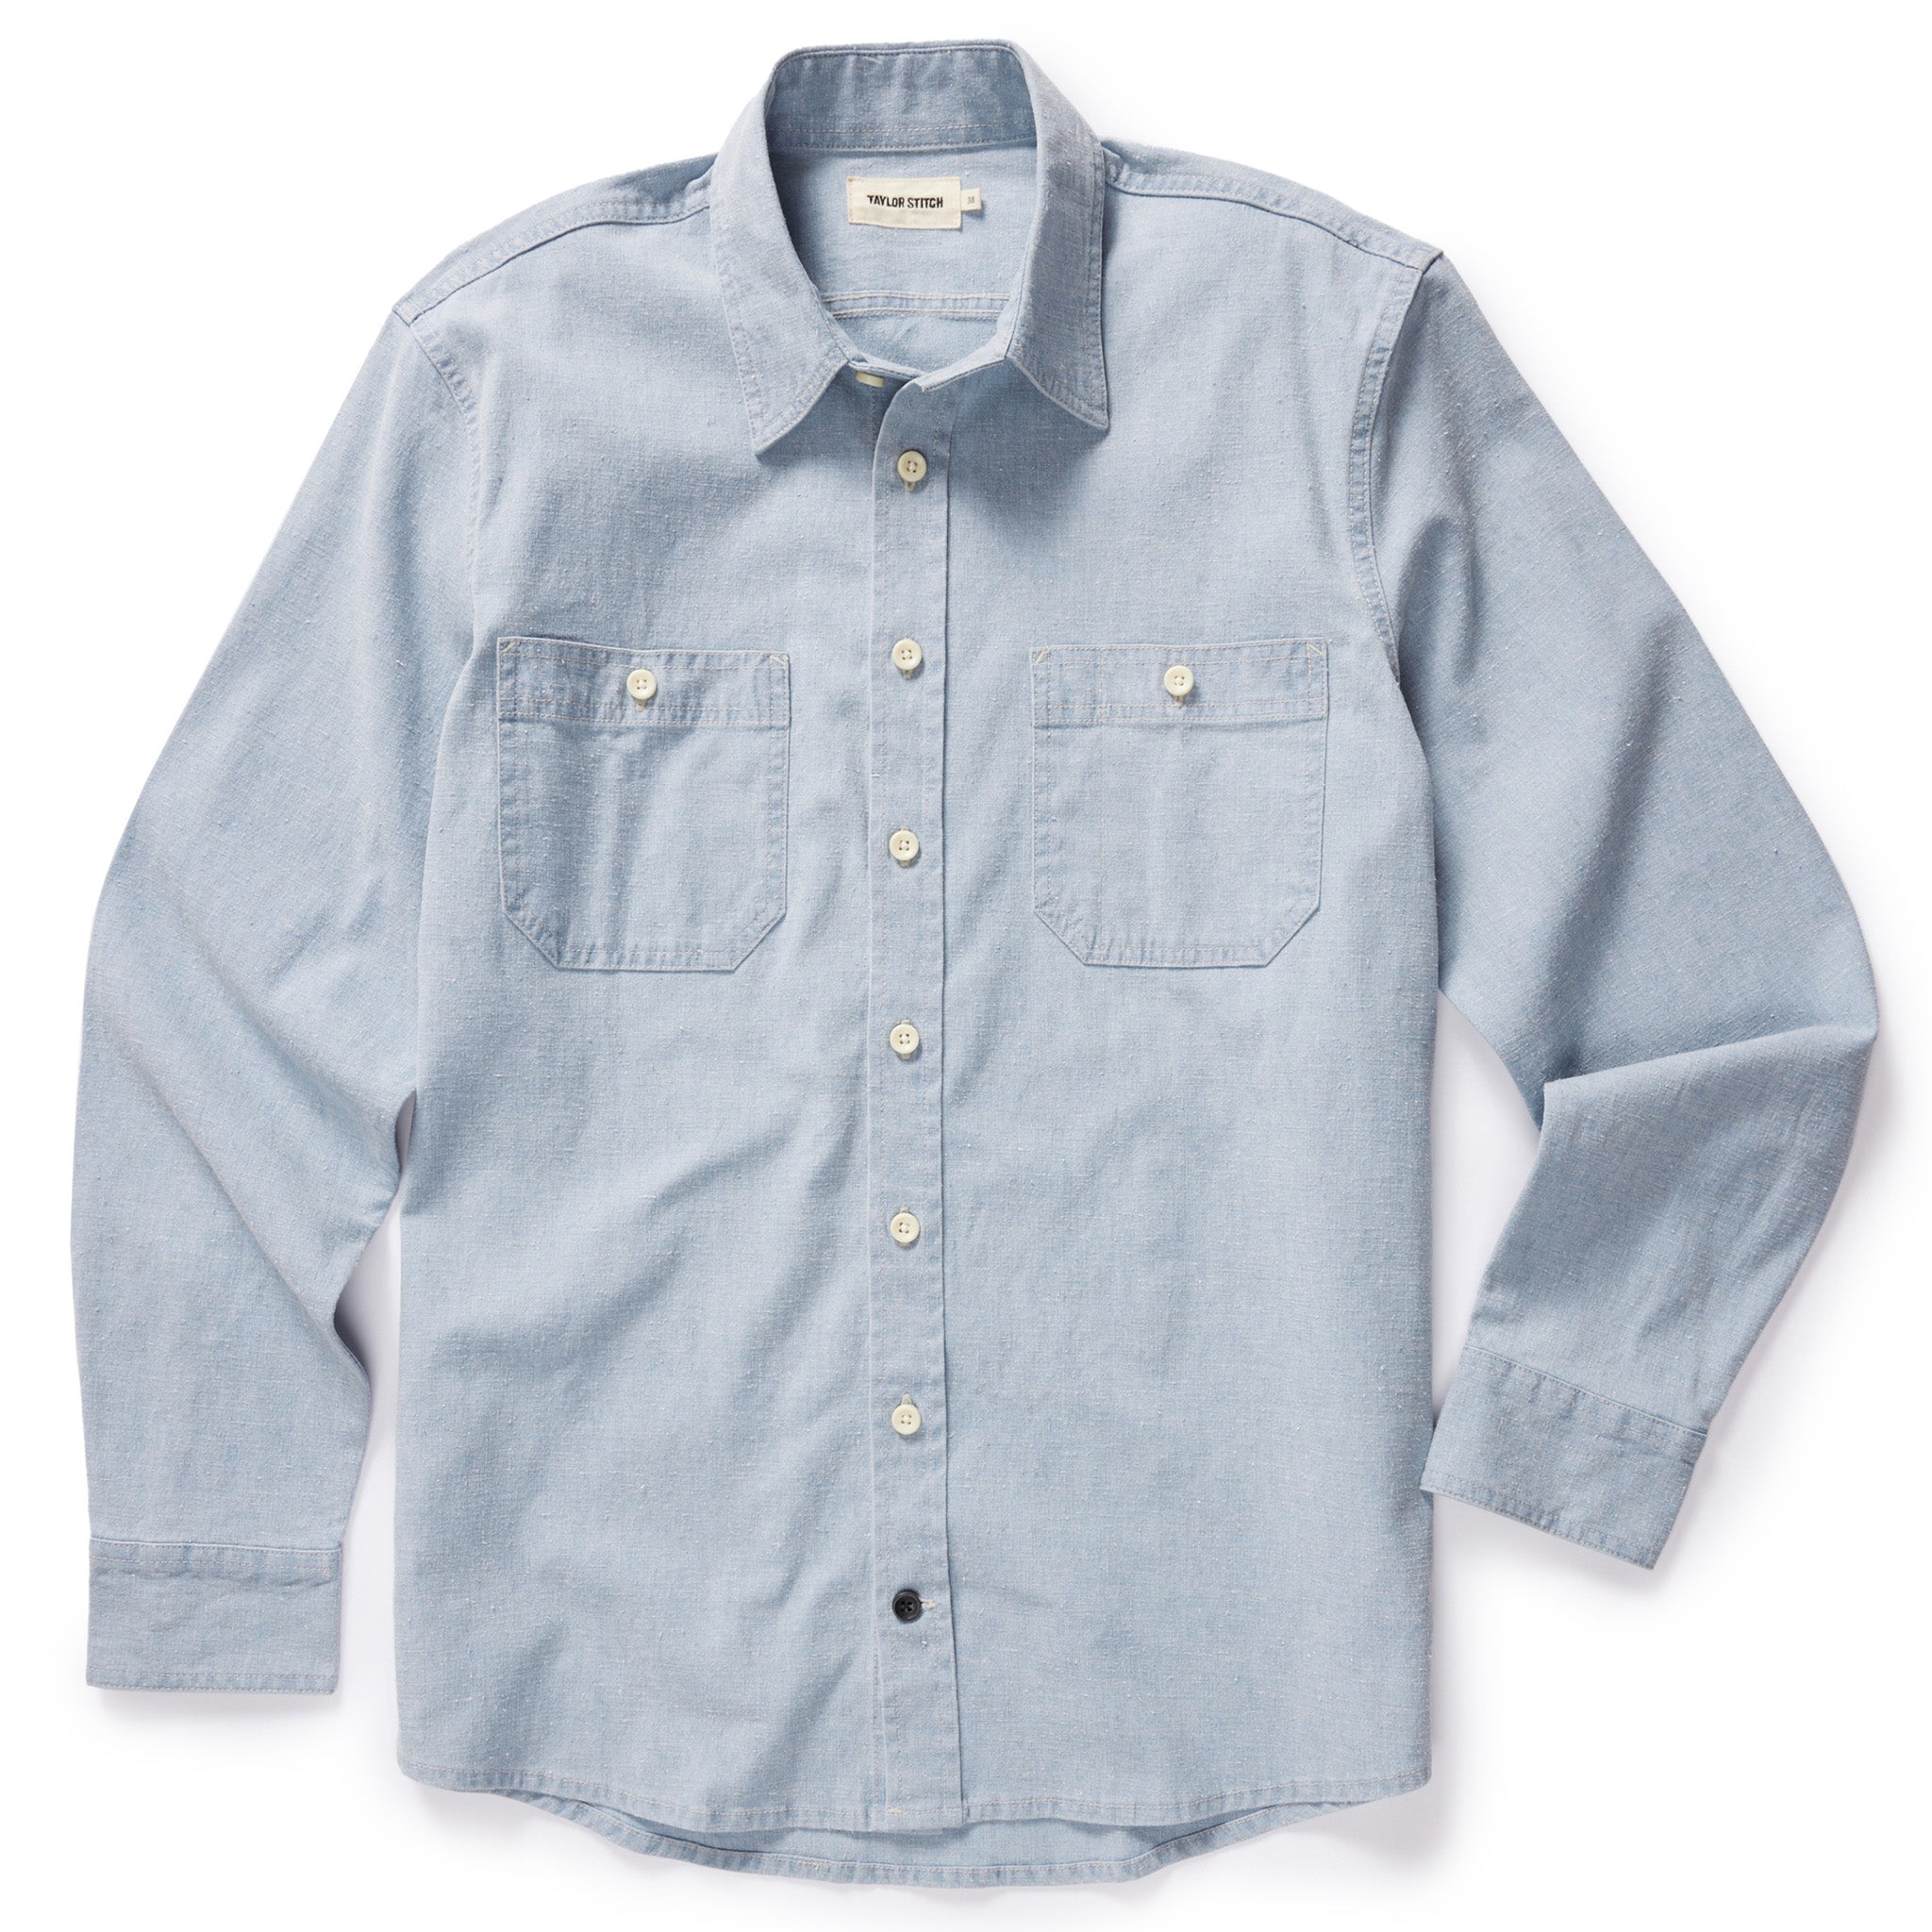 The Utility Shirt in Washed Indigo Boss Duck